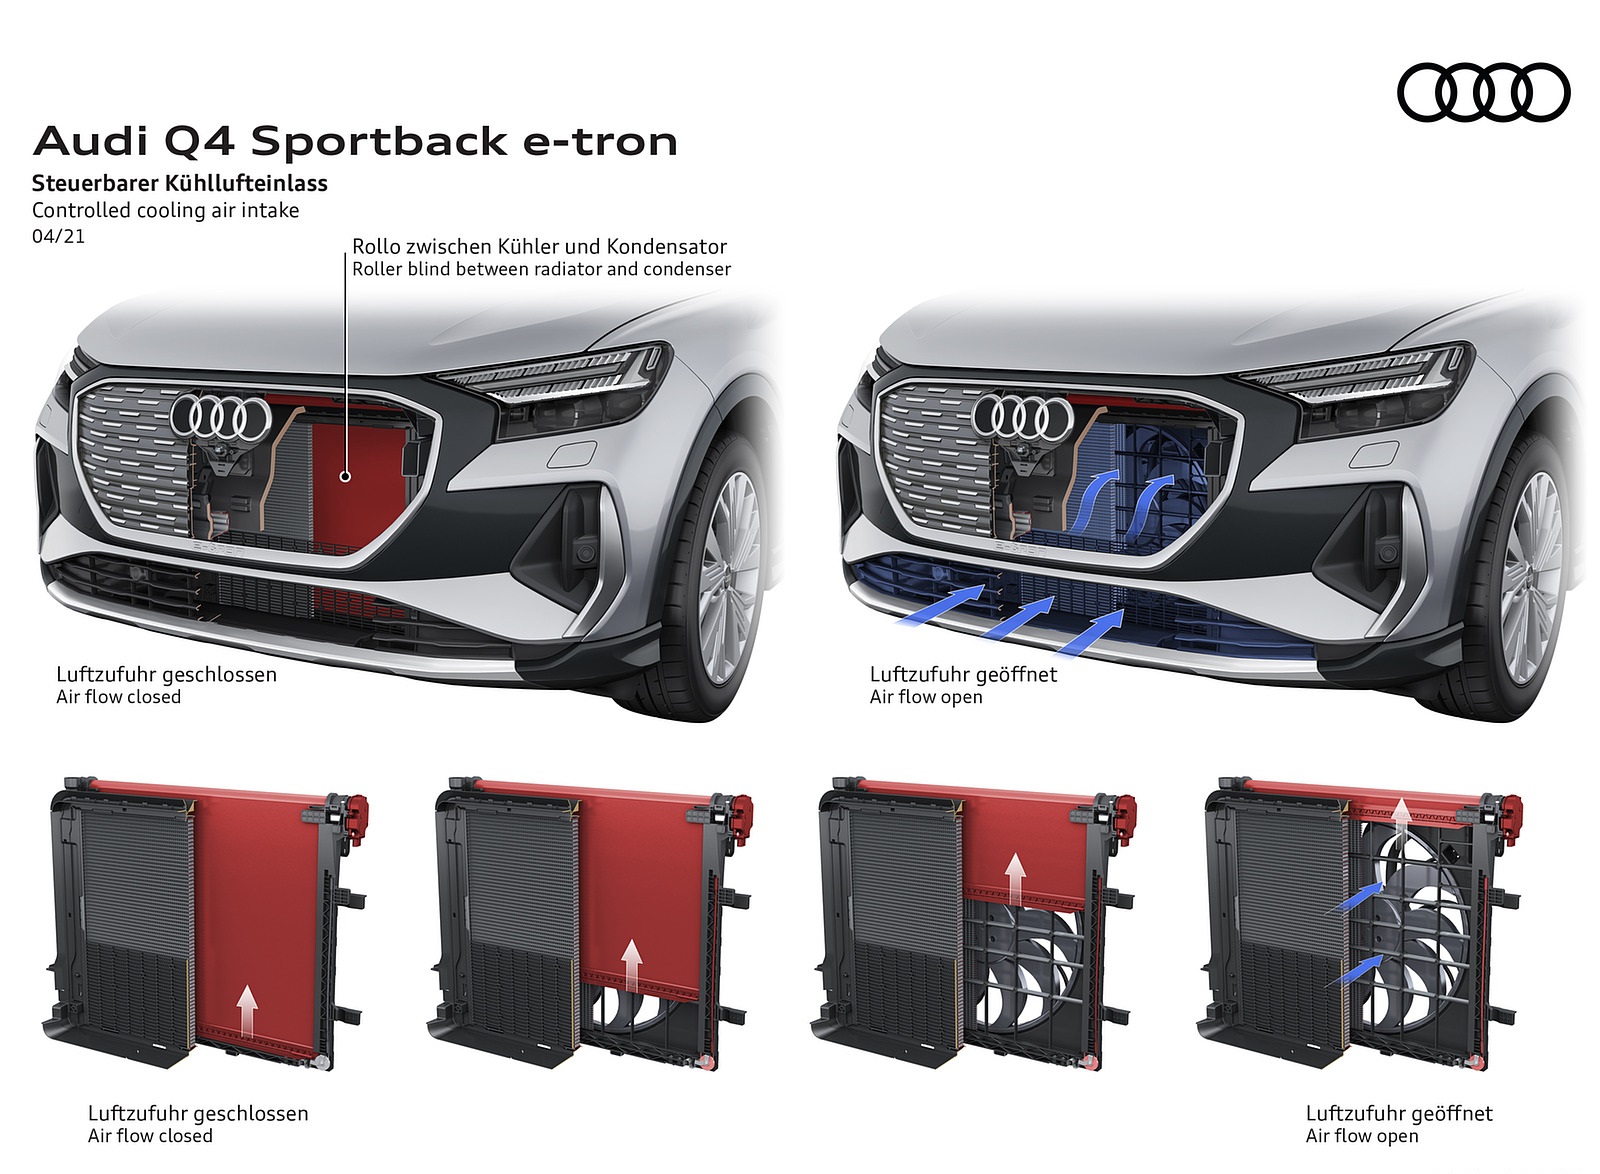 2022 Audi Q4 Sportback e-tron Controlled cooling air intake Wallpapers #122 of 125